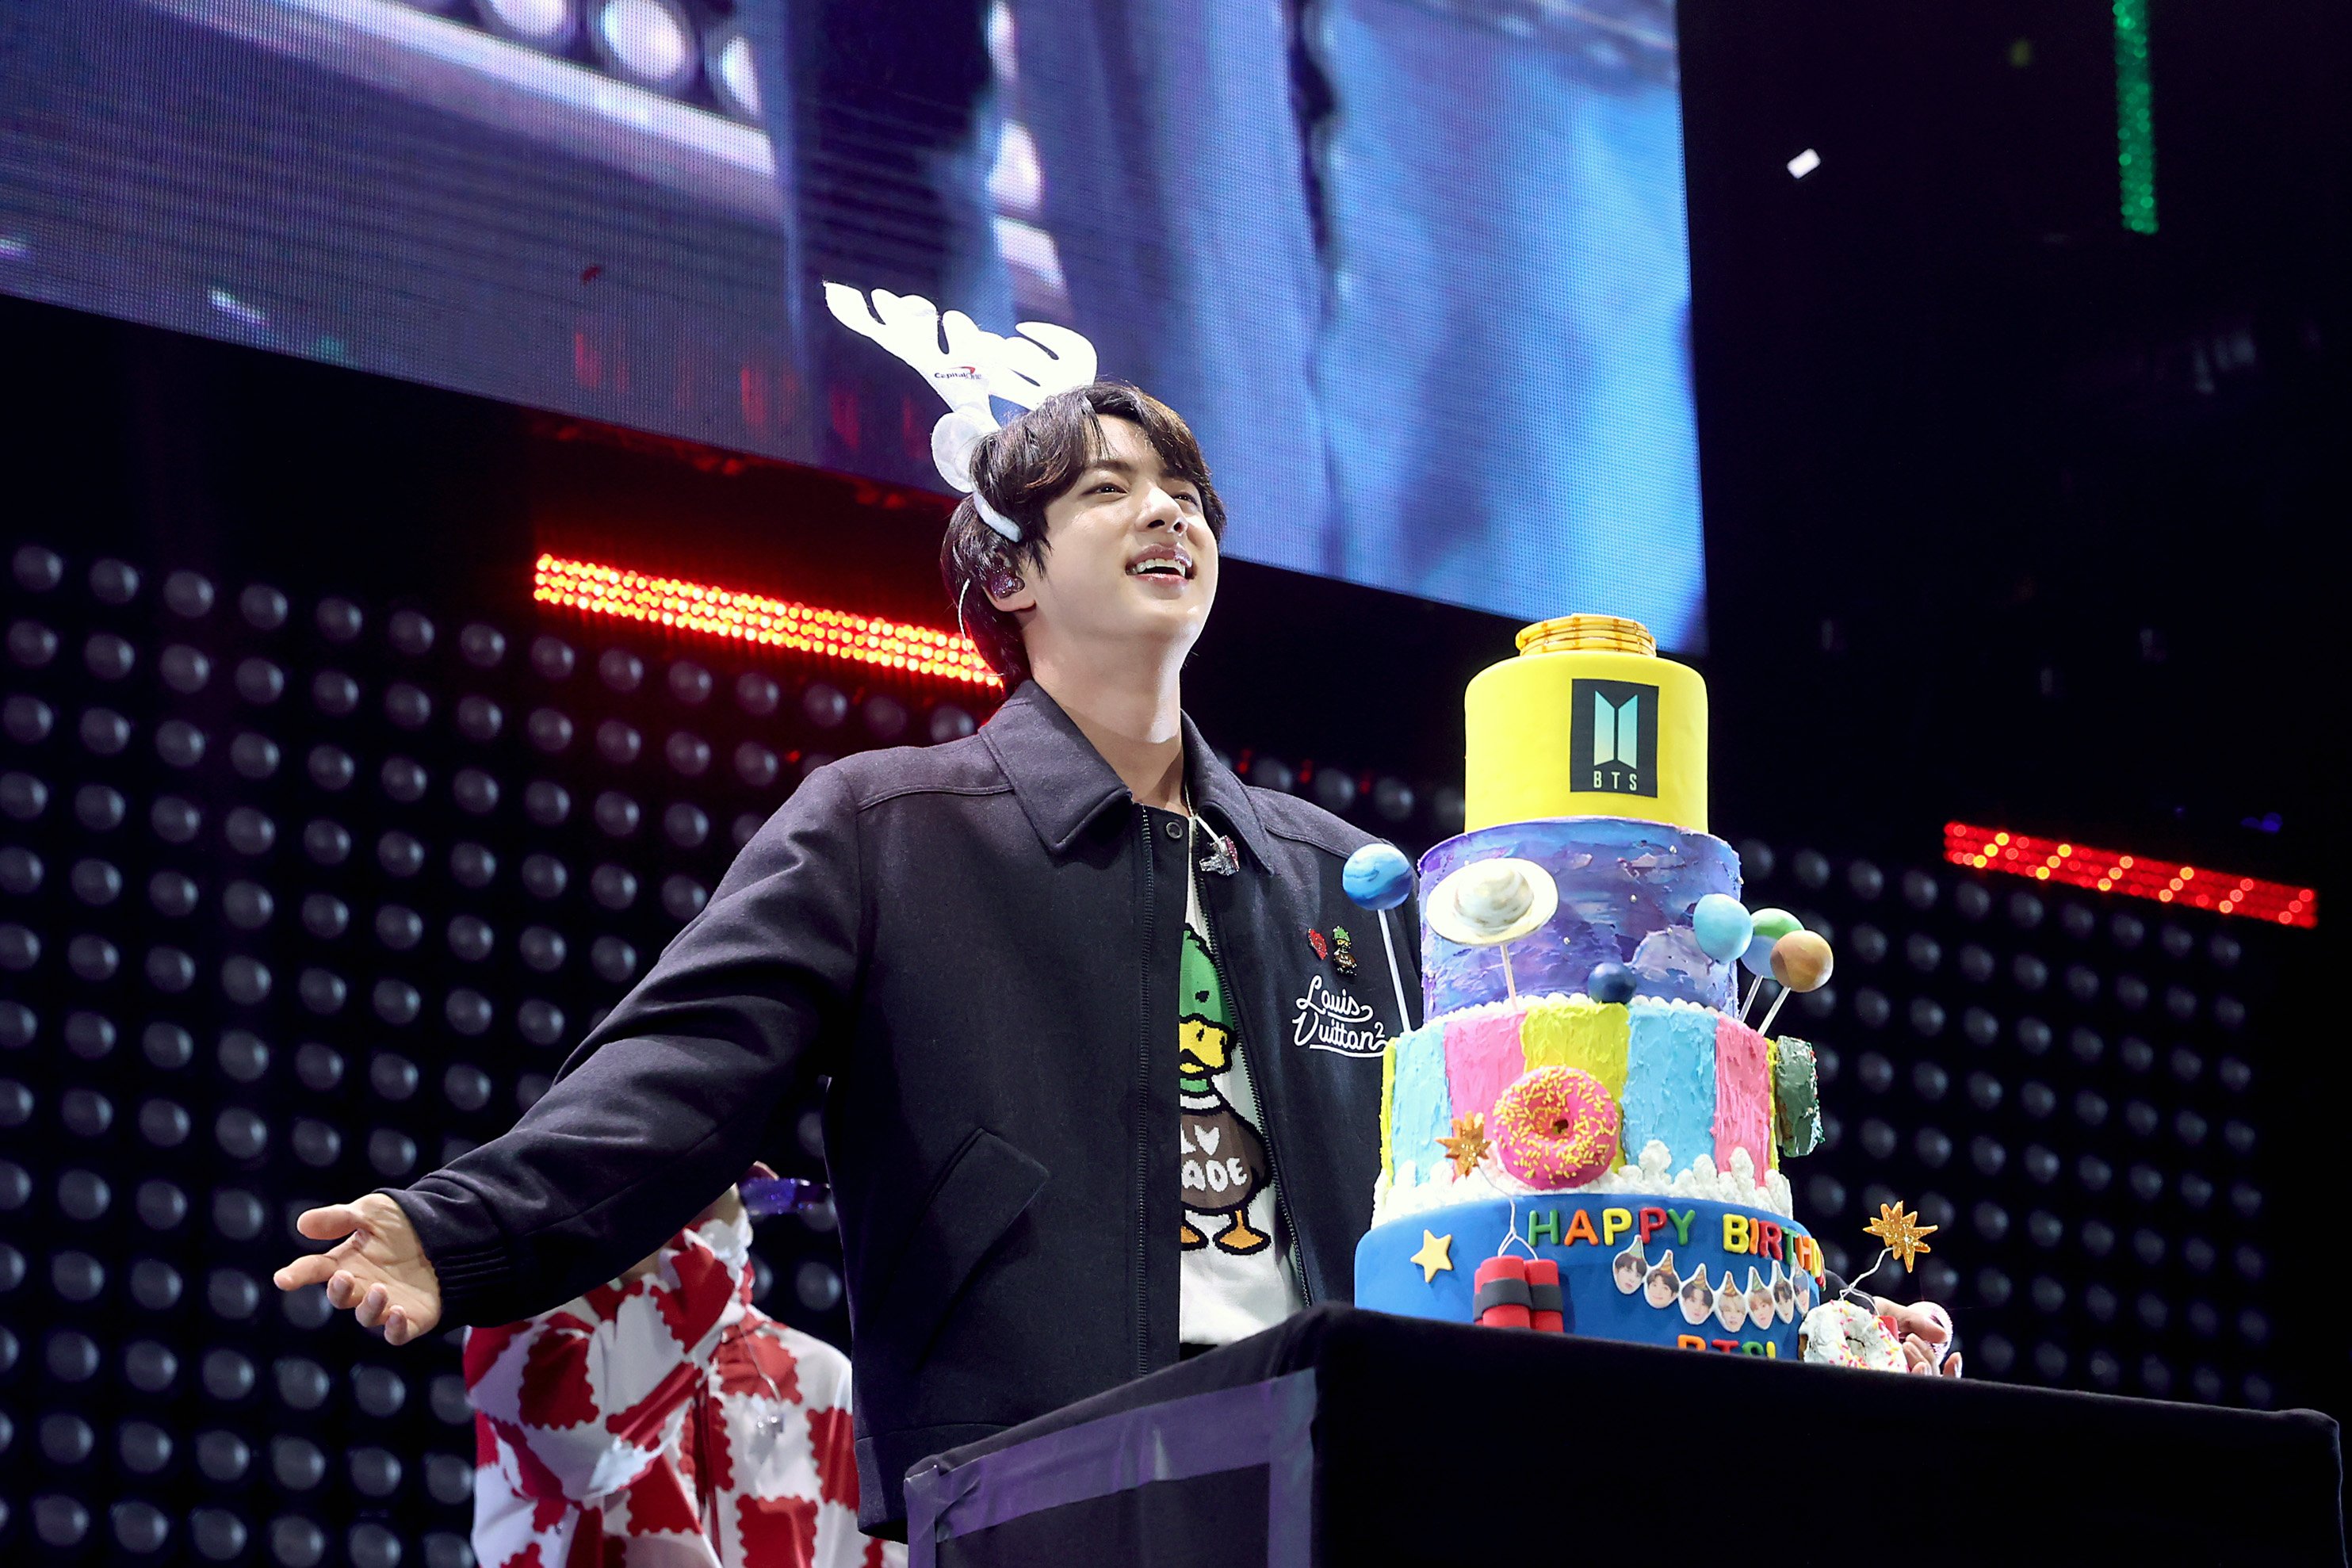 BTS sings Happy Birthday to Jin as they during iHeartRadio 102.7 KIIS FM's Jingle Ball 2021